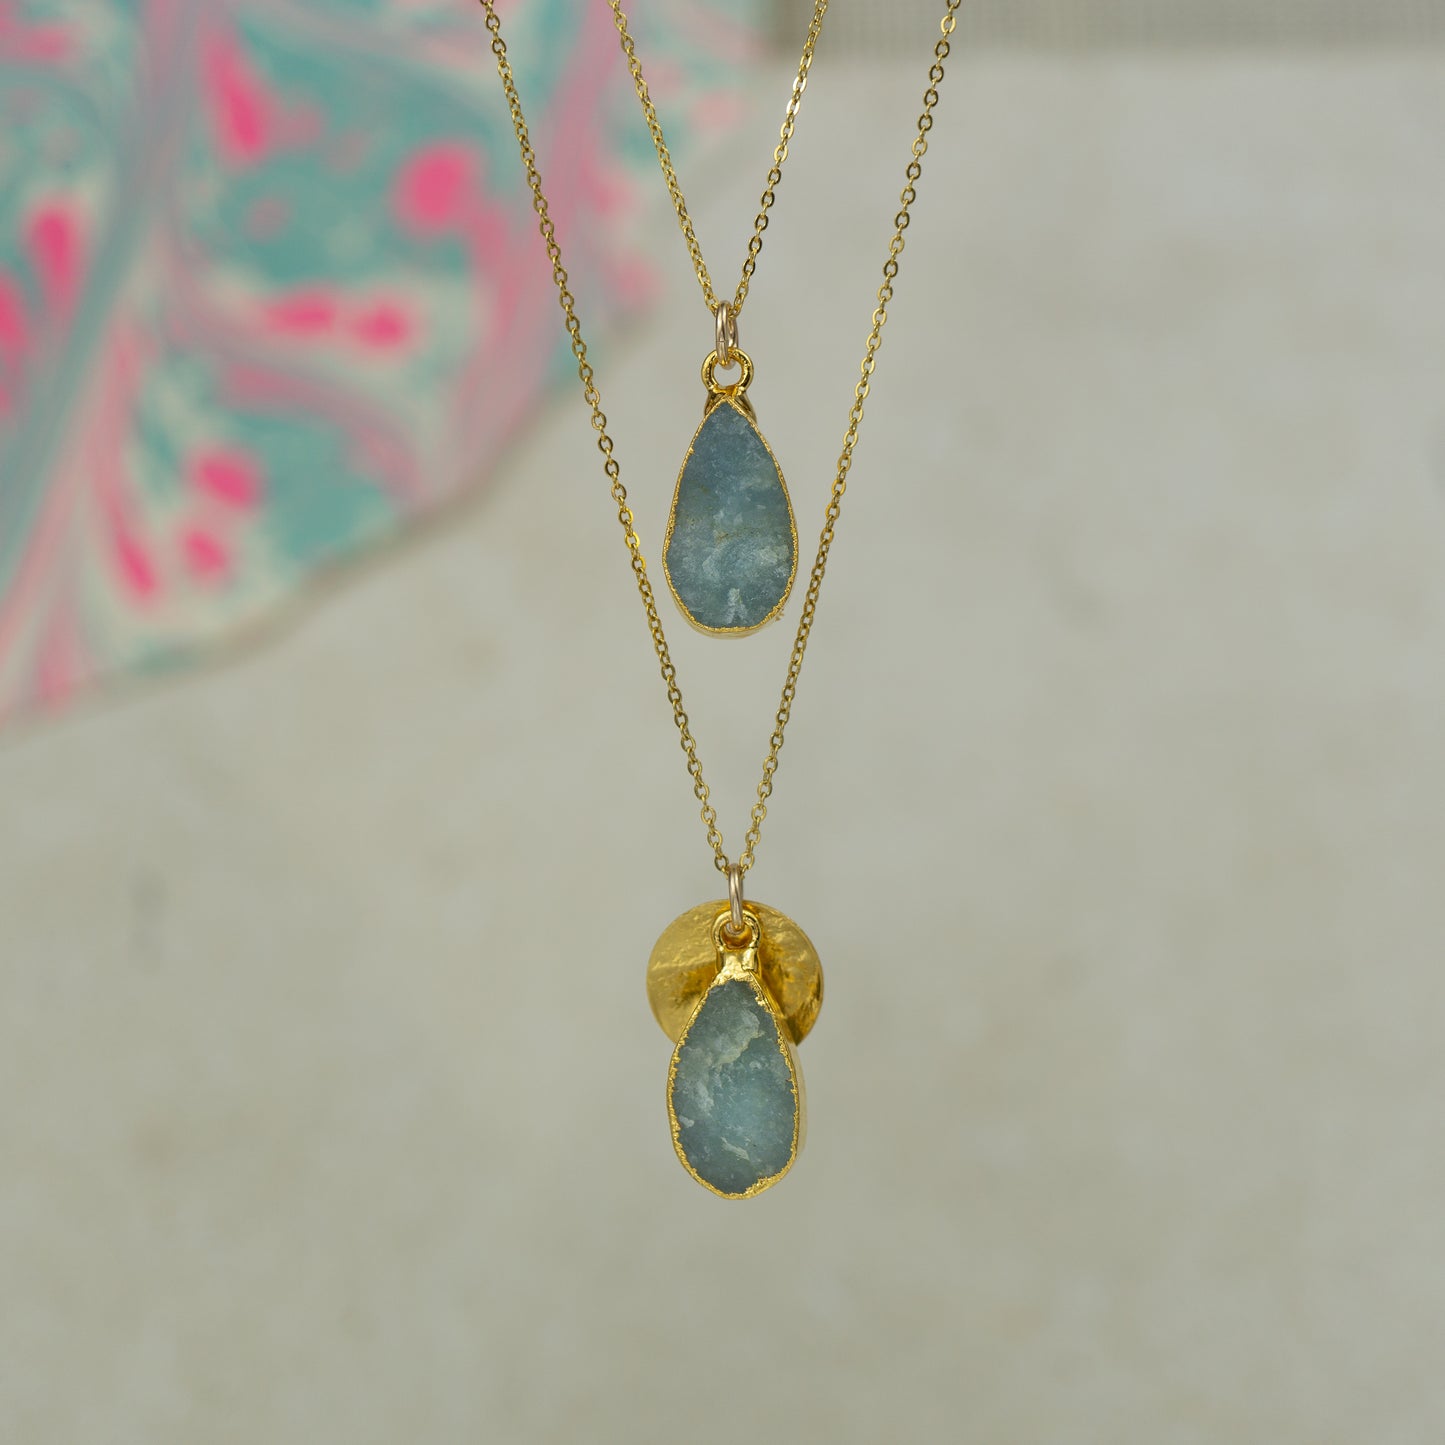 Raw blue Aquamarine teardrop pear shaped pendants finished in gold on a chains.